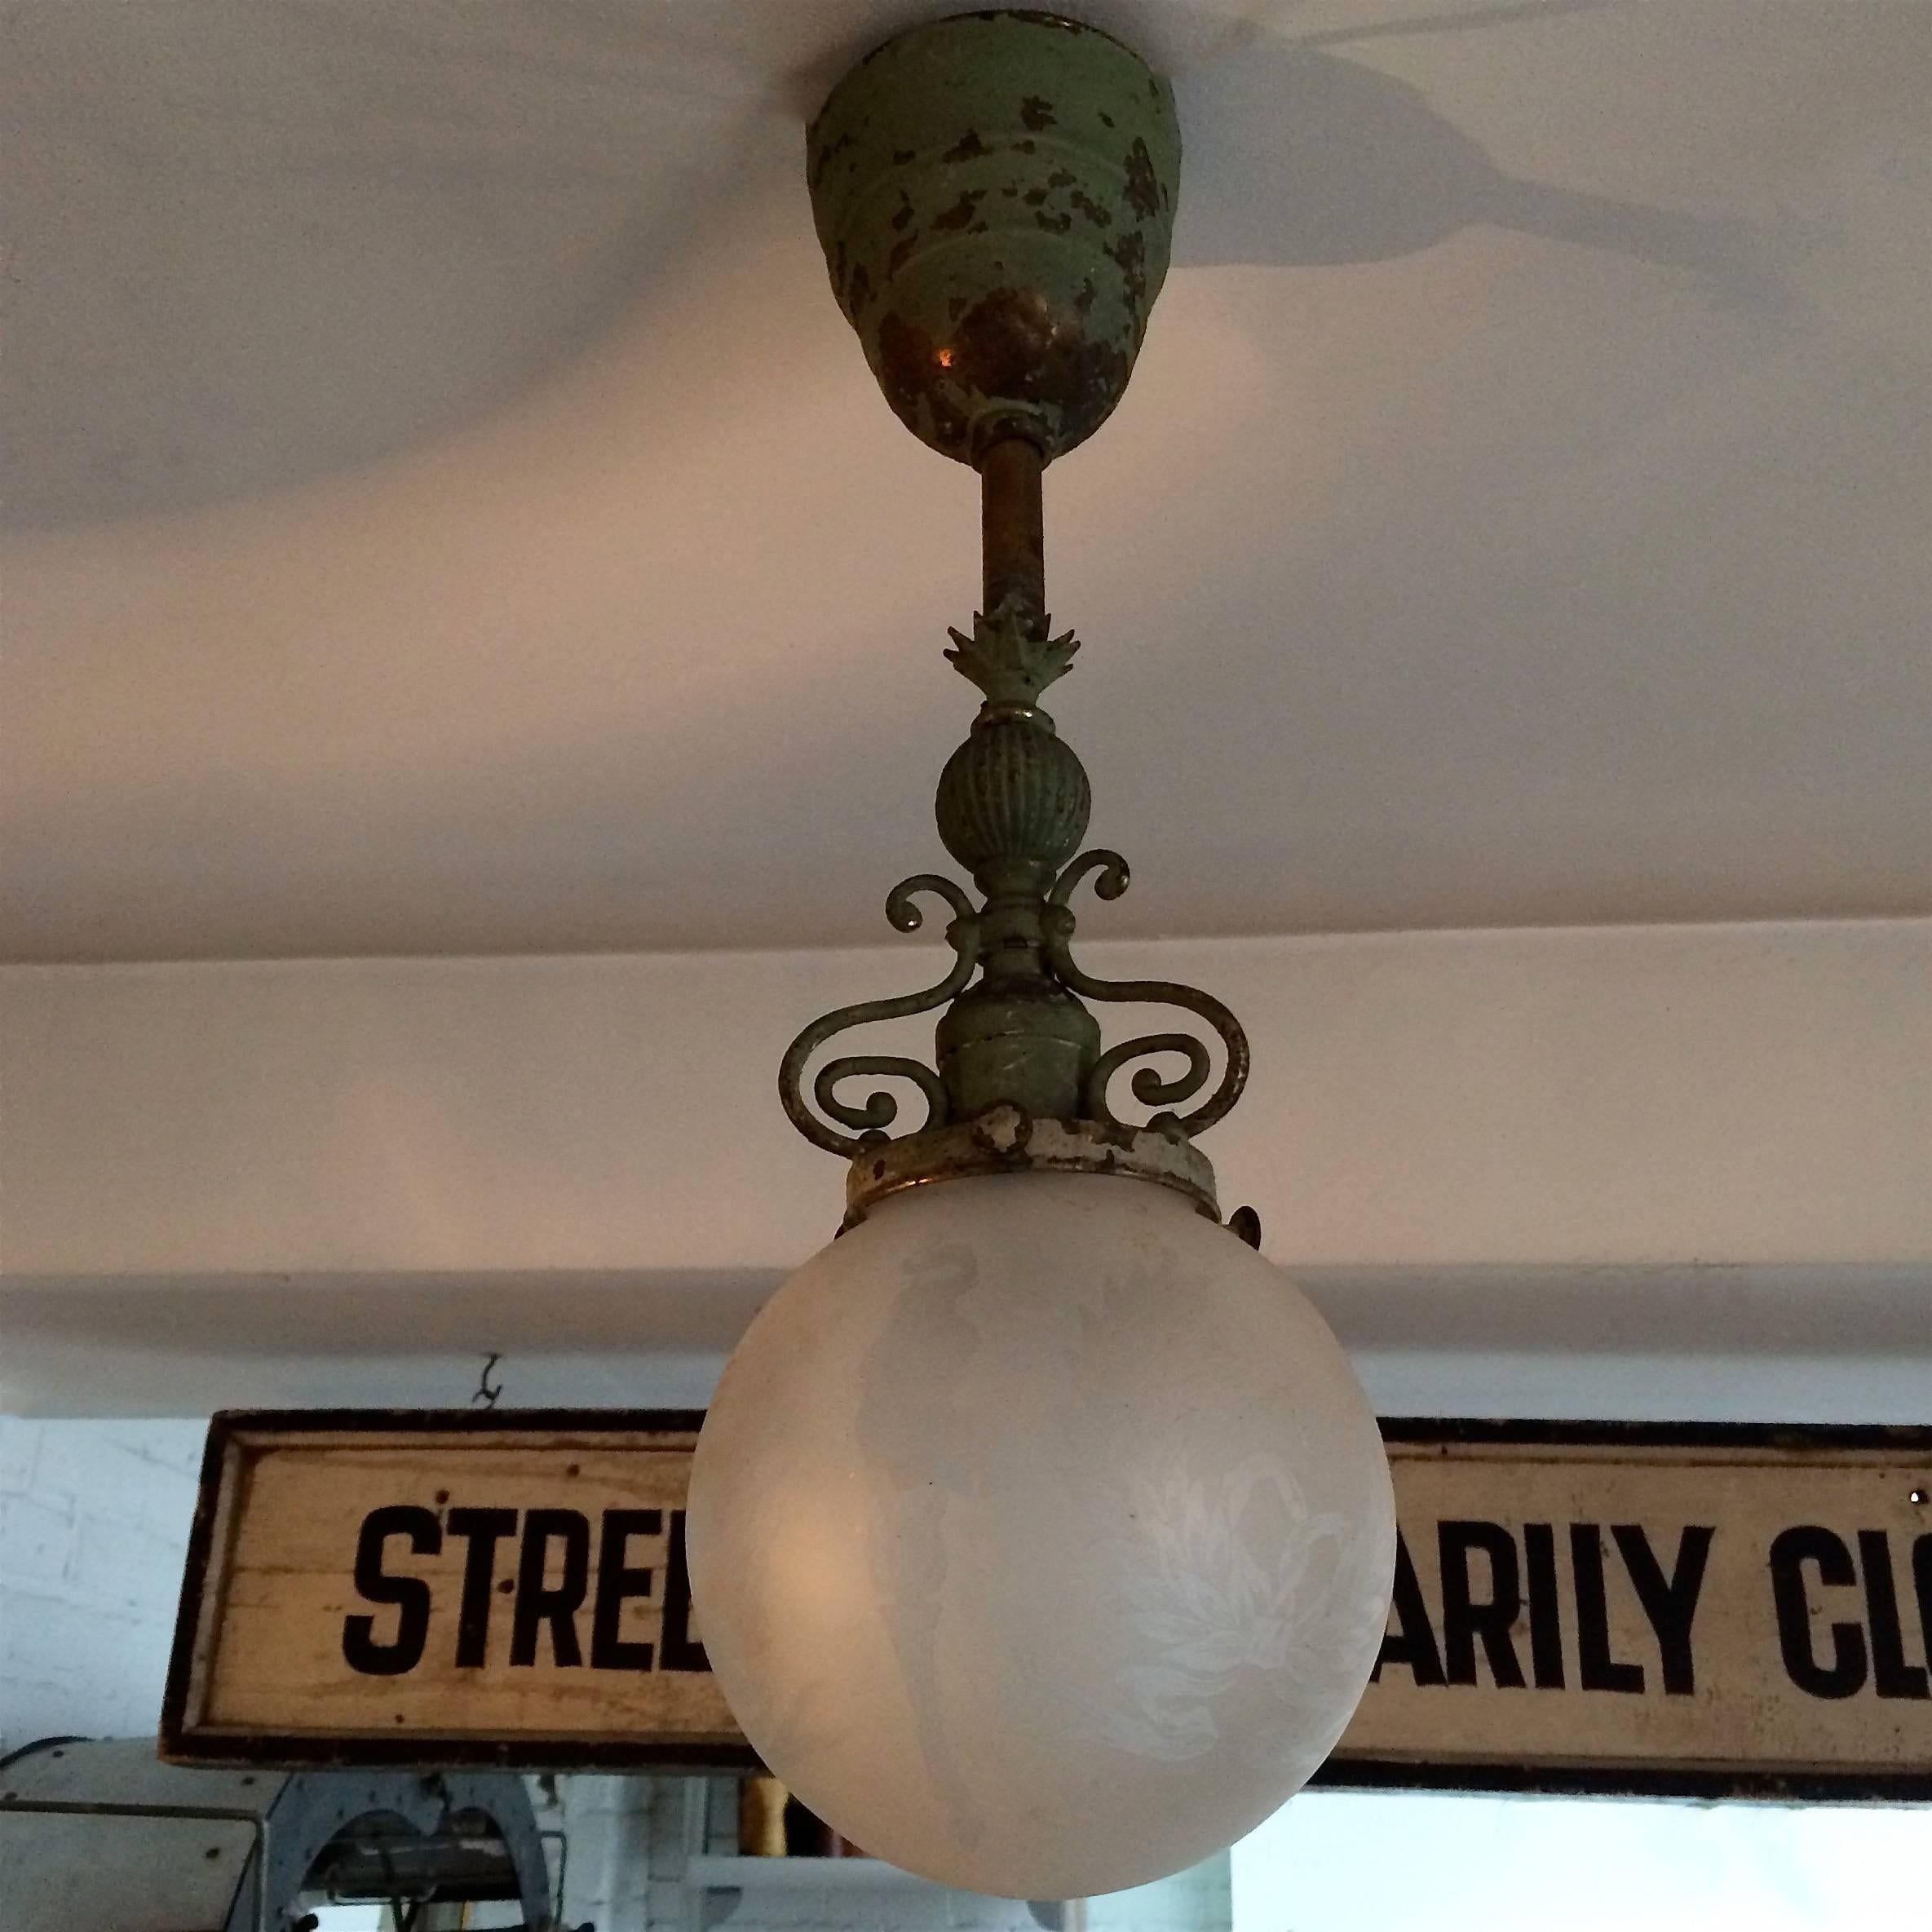 Early 20th century pendant light features an ornate, painted brass pole and canopy with a 6 inch frosted, patterned glass globe shade. The light is wired to accept a 100 watt bulb.